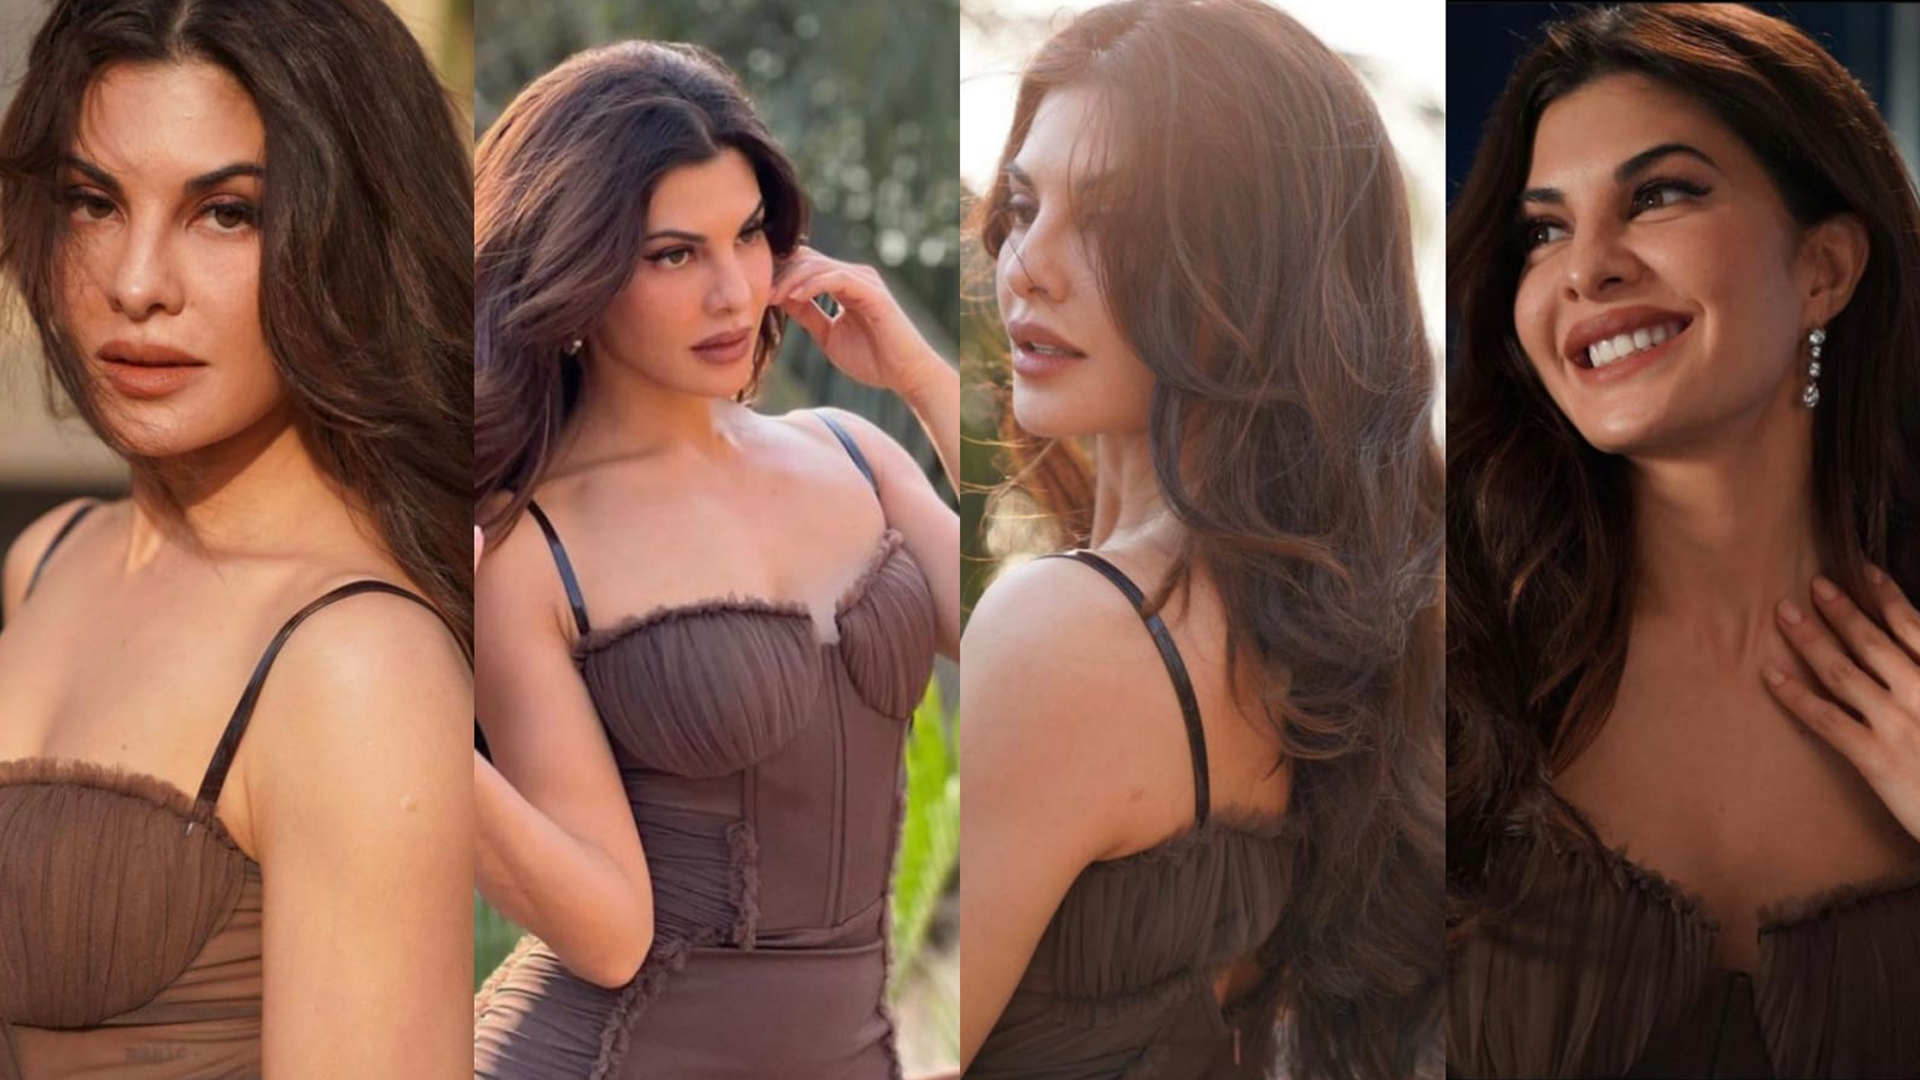 Jacqueline Fernandez’s new look from the promotions of ‘Attack’ is killer